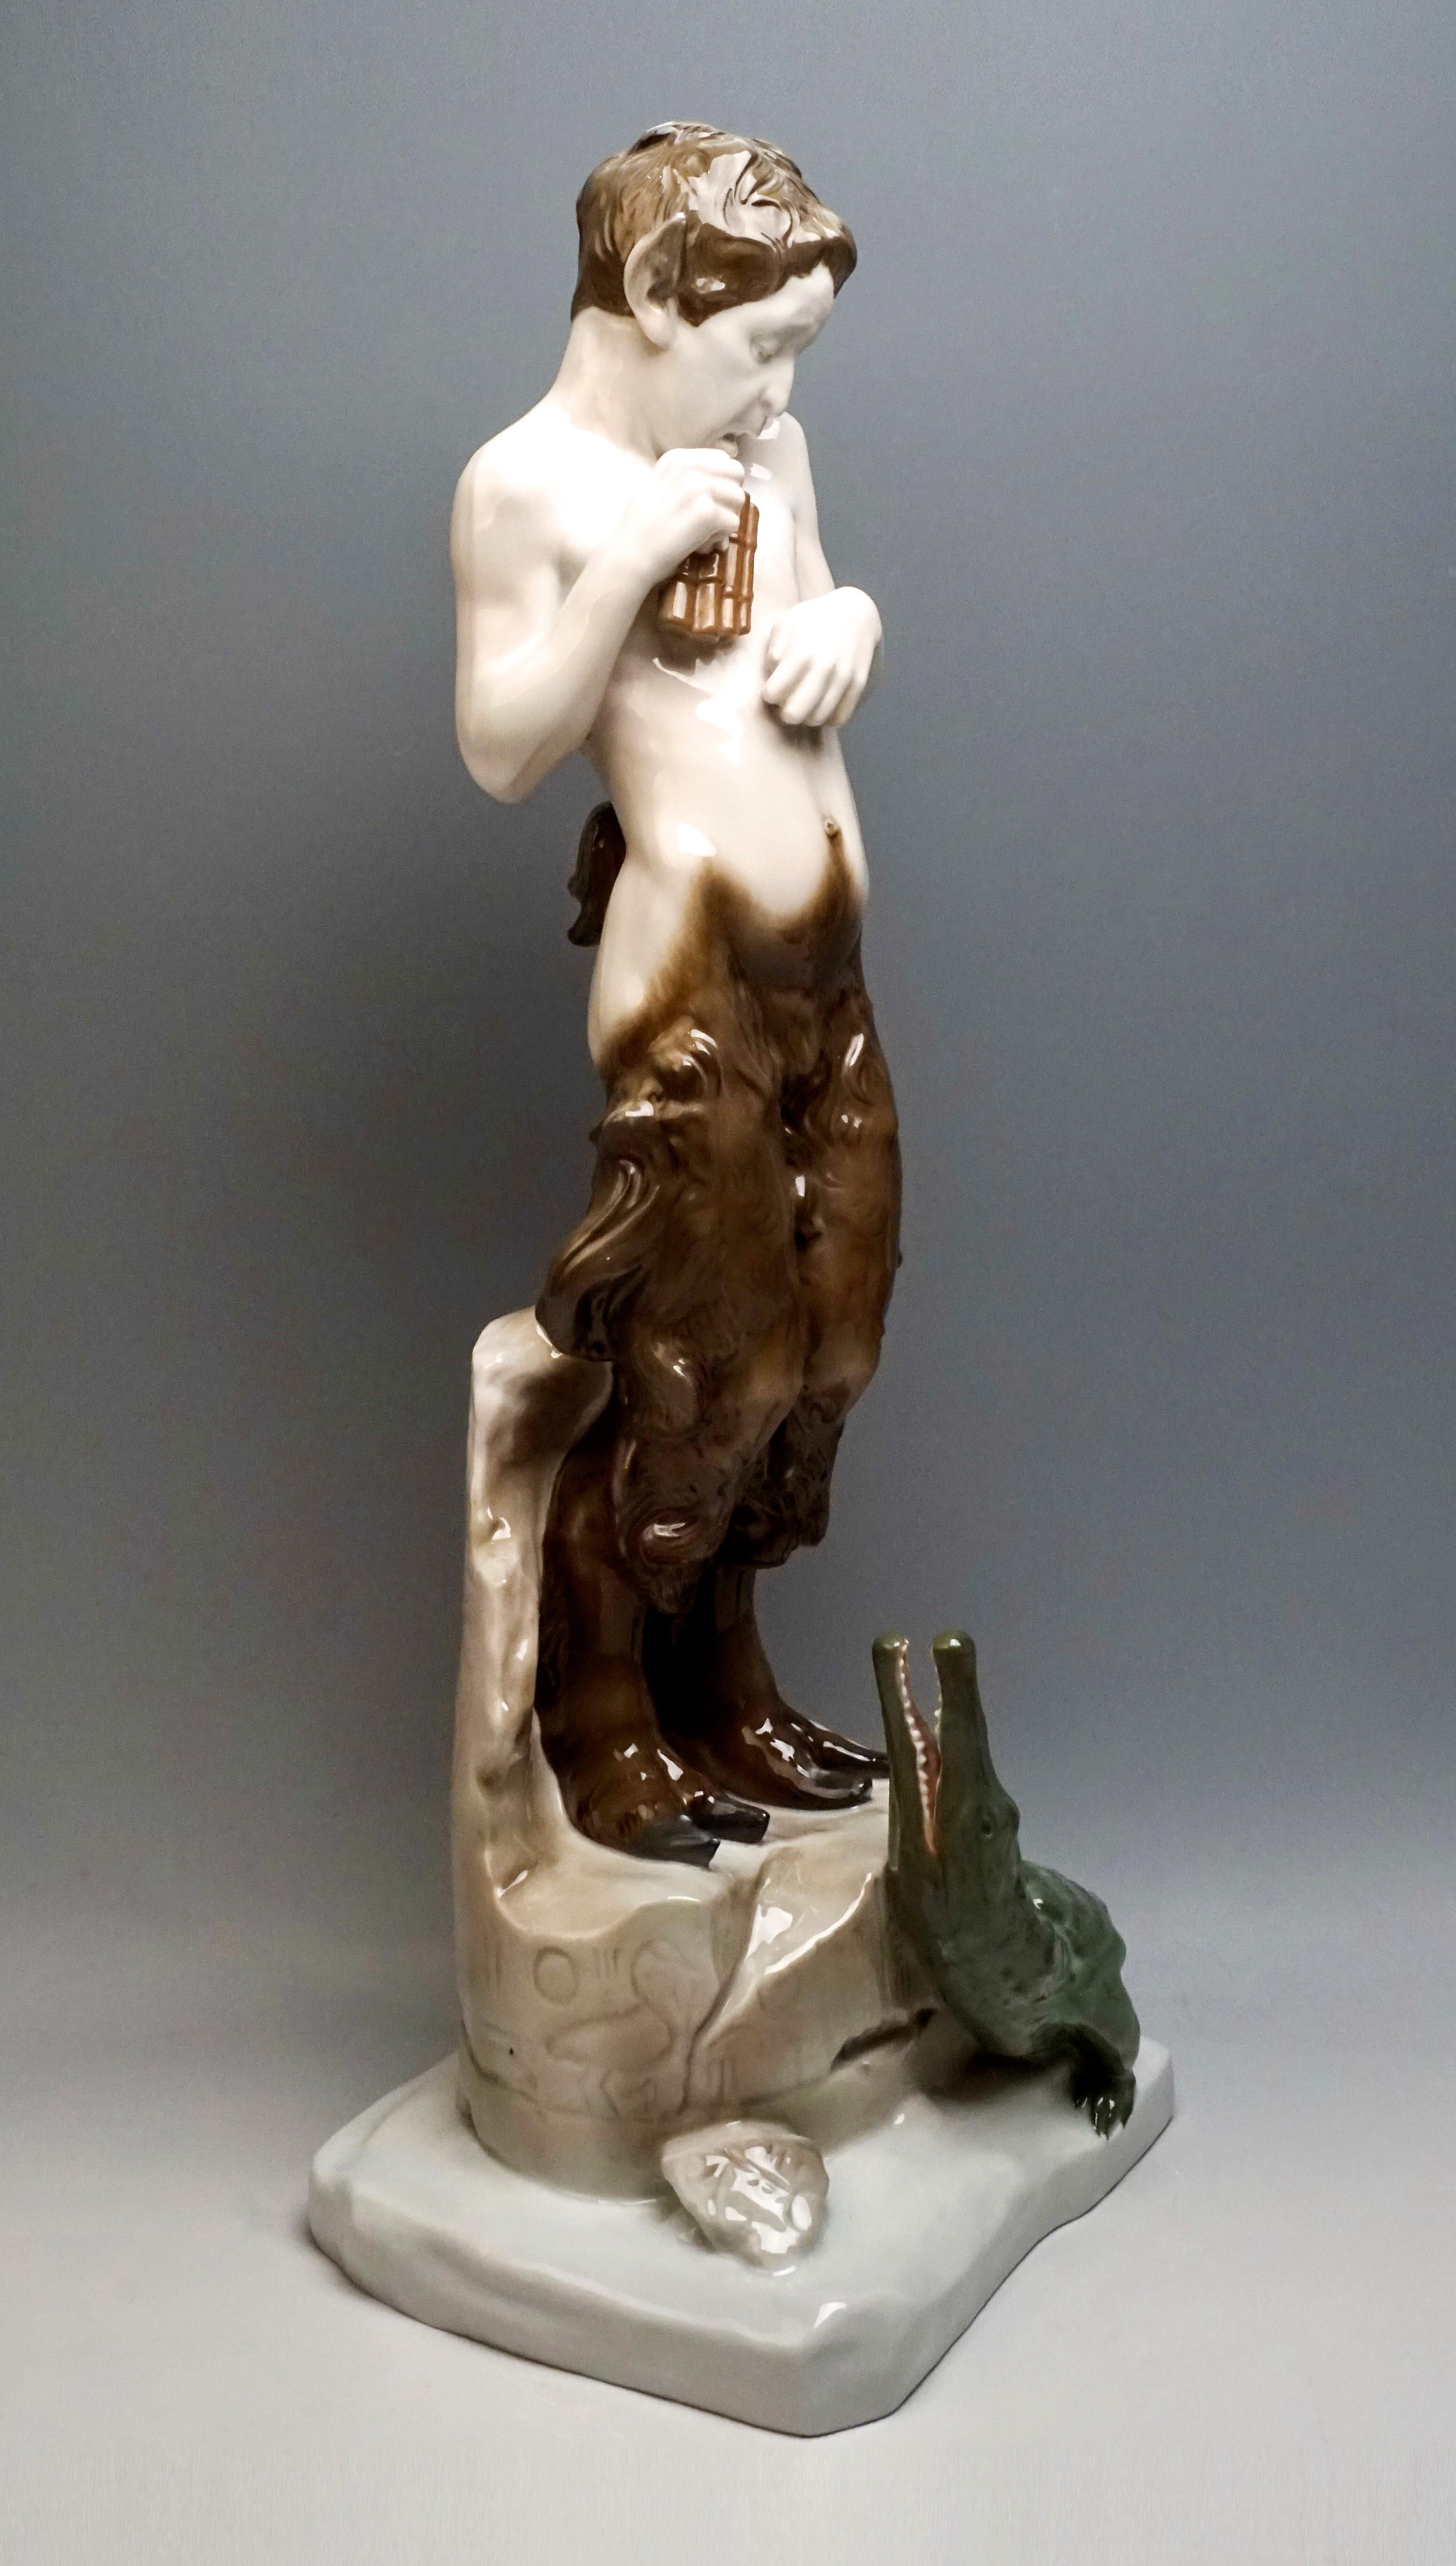 Admirable and very rare Art Nouveau Figurine by Rosenthal.
The faun stands frightened on a broken piece of ruins with Egyptian inscriptions, holding a panpipe in his right hand, a small crocodile at his feet, which looks up at him with open mouth